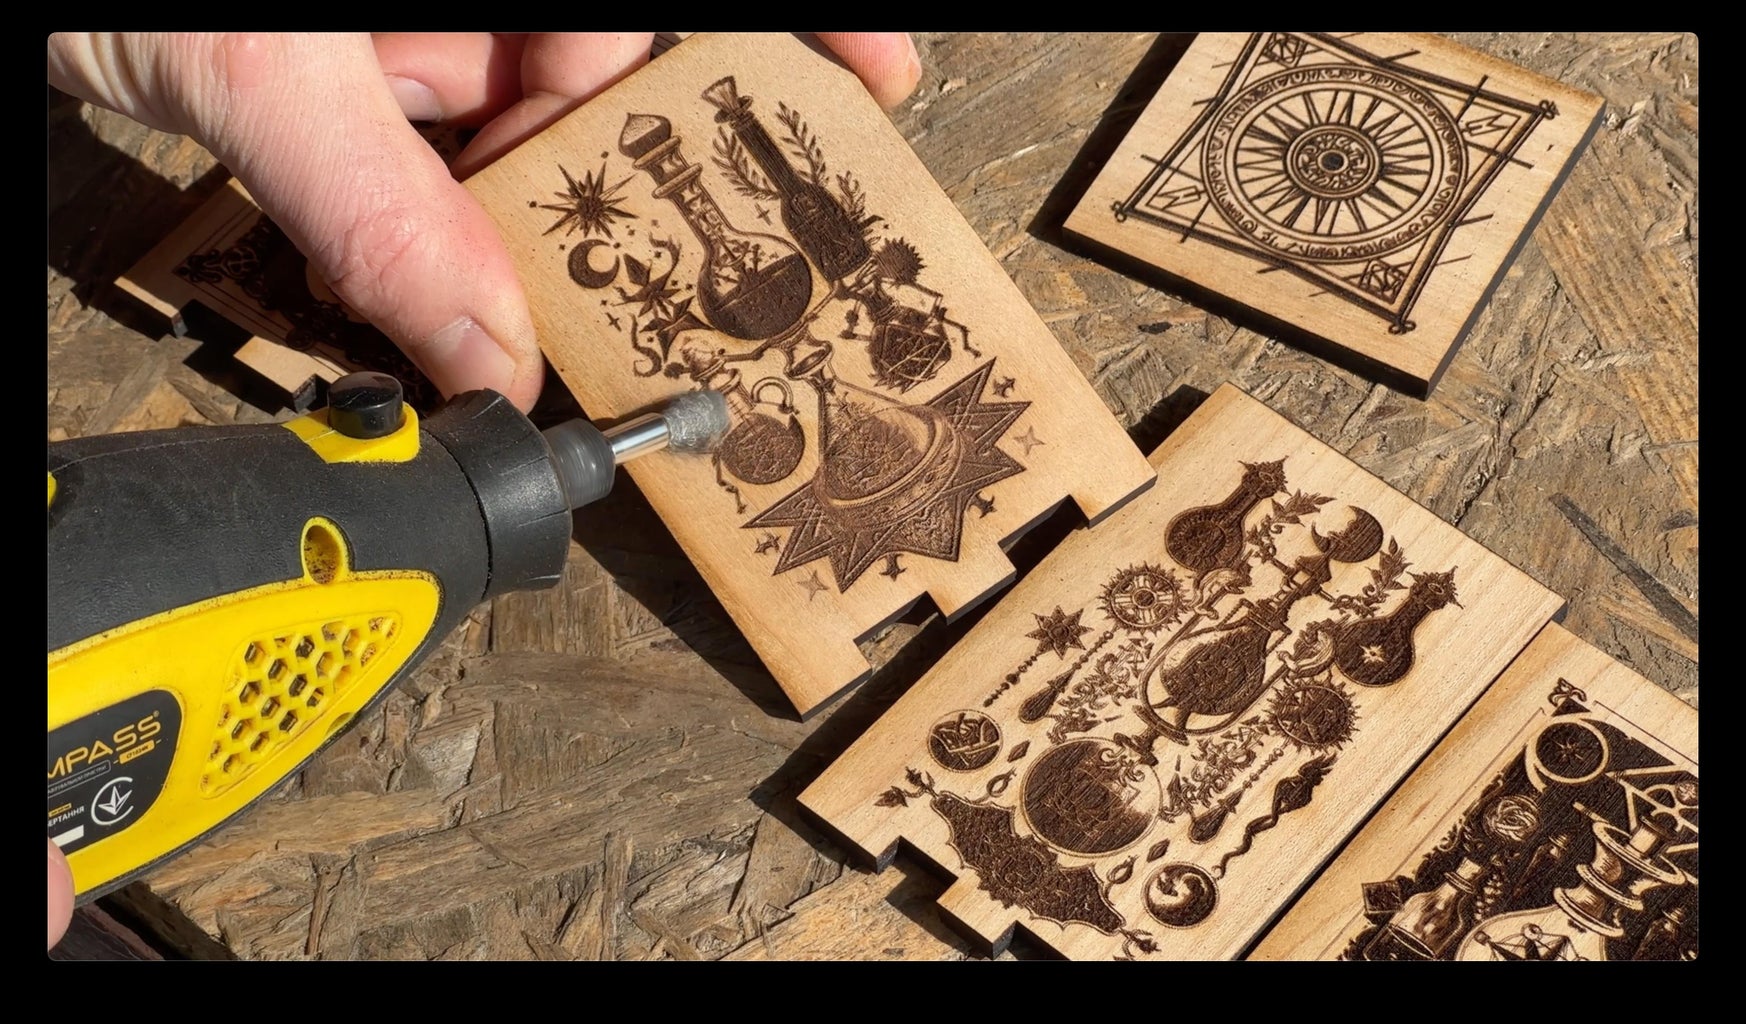 Clean Engravings From the Wooden Burn Dust